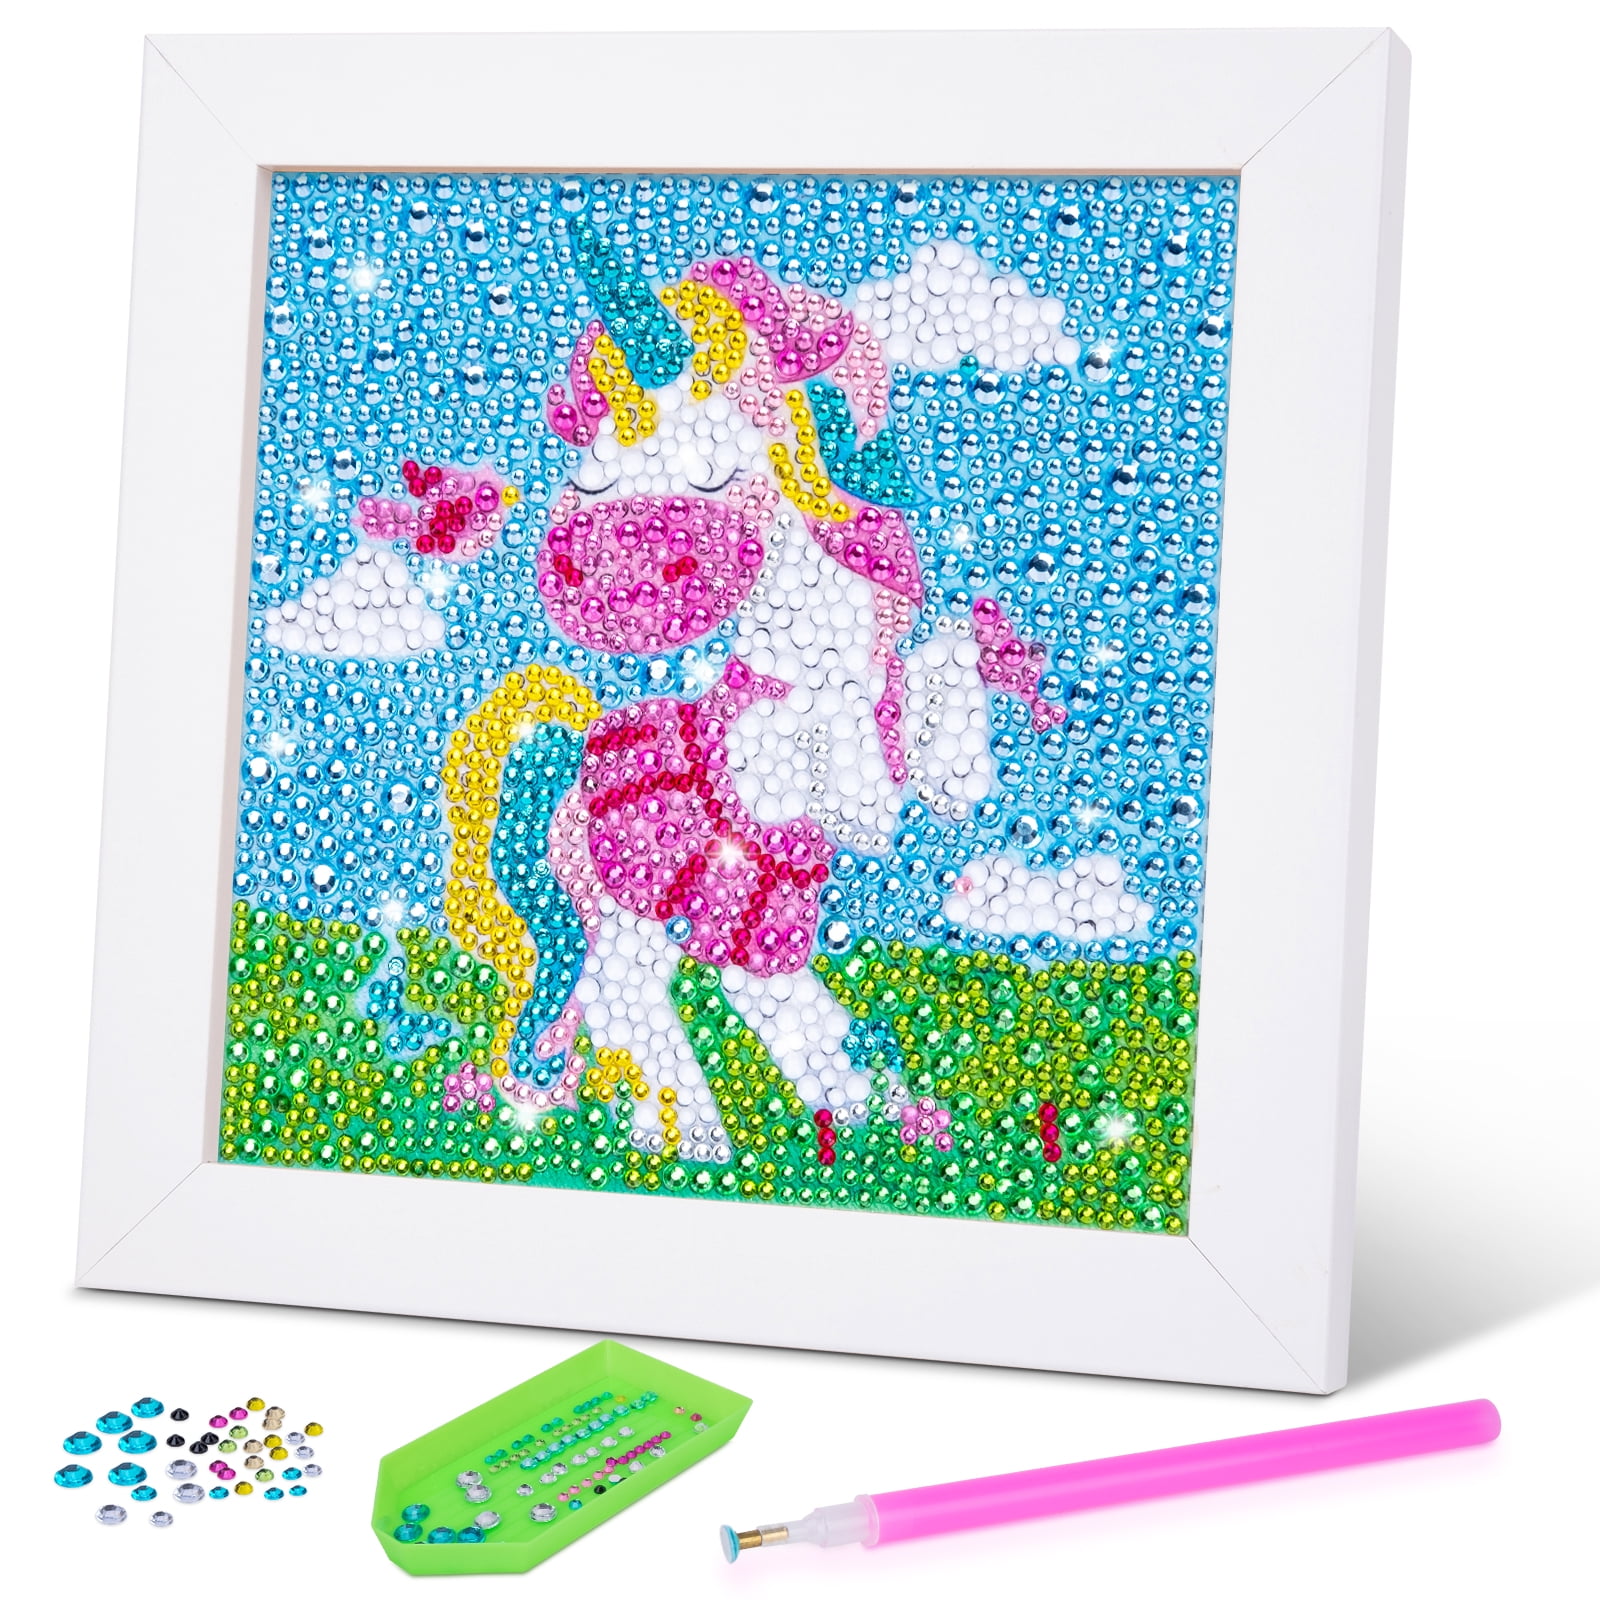 Unicorn Toy Gifts for Girls Age 6 7 8 9: Crafts for Kids 7-12 Years Old  Girls Painting Kit for Children Supplies Birthday Present Diamond Painting